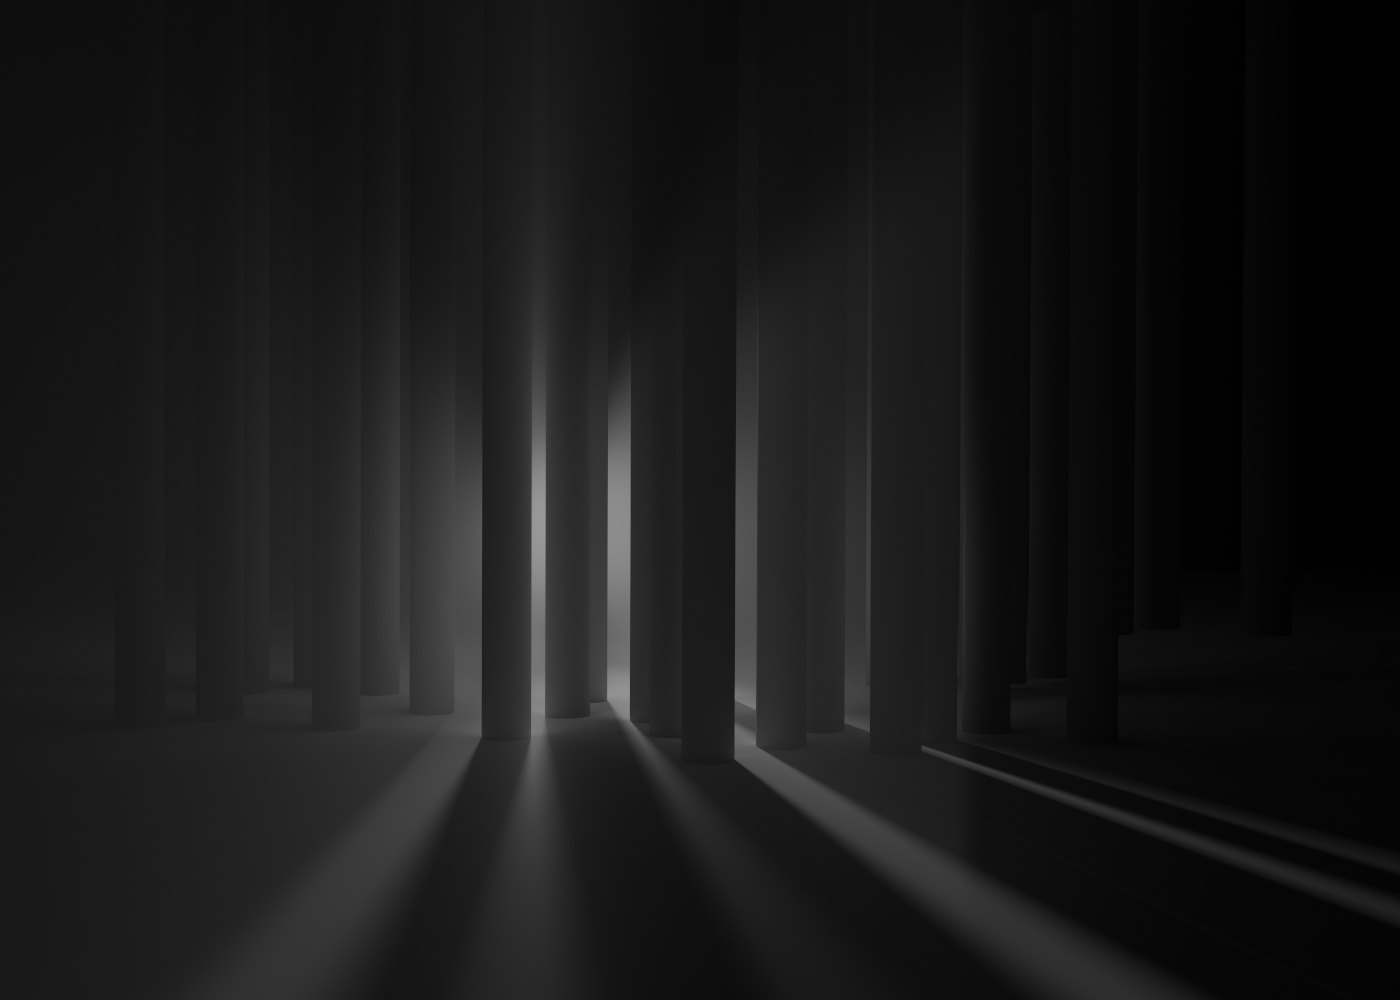 Virtual abstract scenery, abstract digital art, raytracing, computer-rendered image, 2020: Many cylindrical pillars stand in darkness in front of the viewer and block the view of a large illuminated spot behind them.